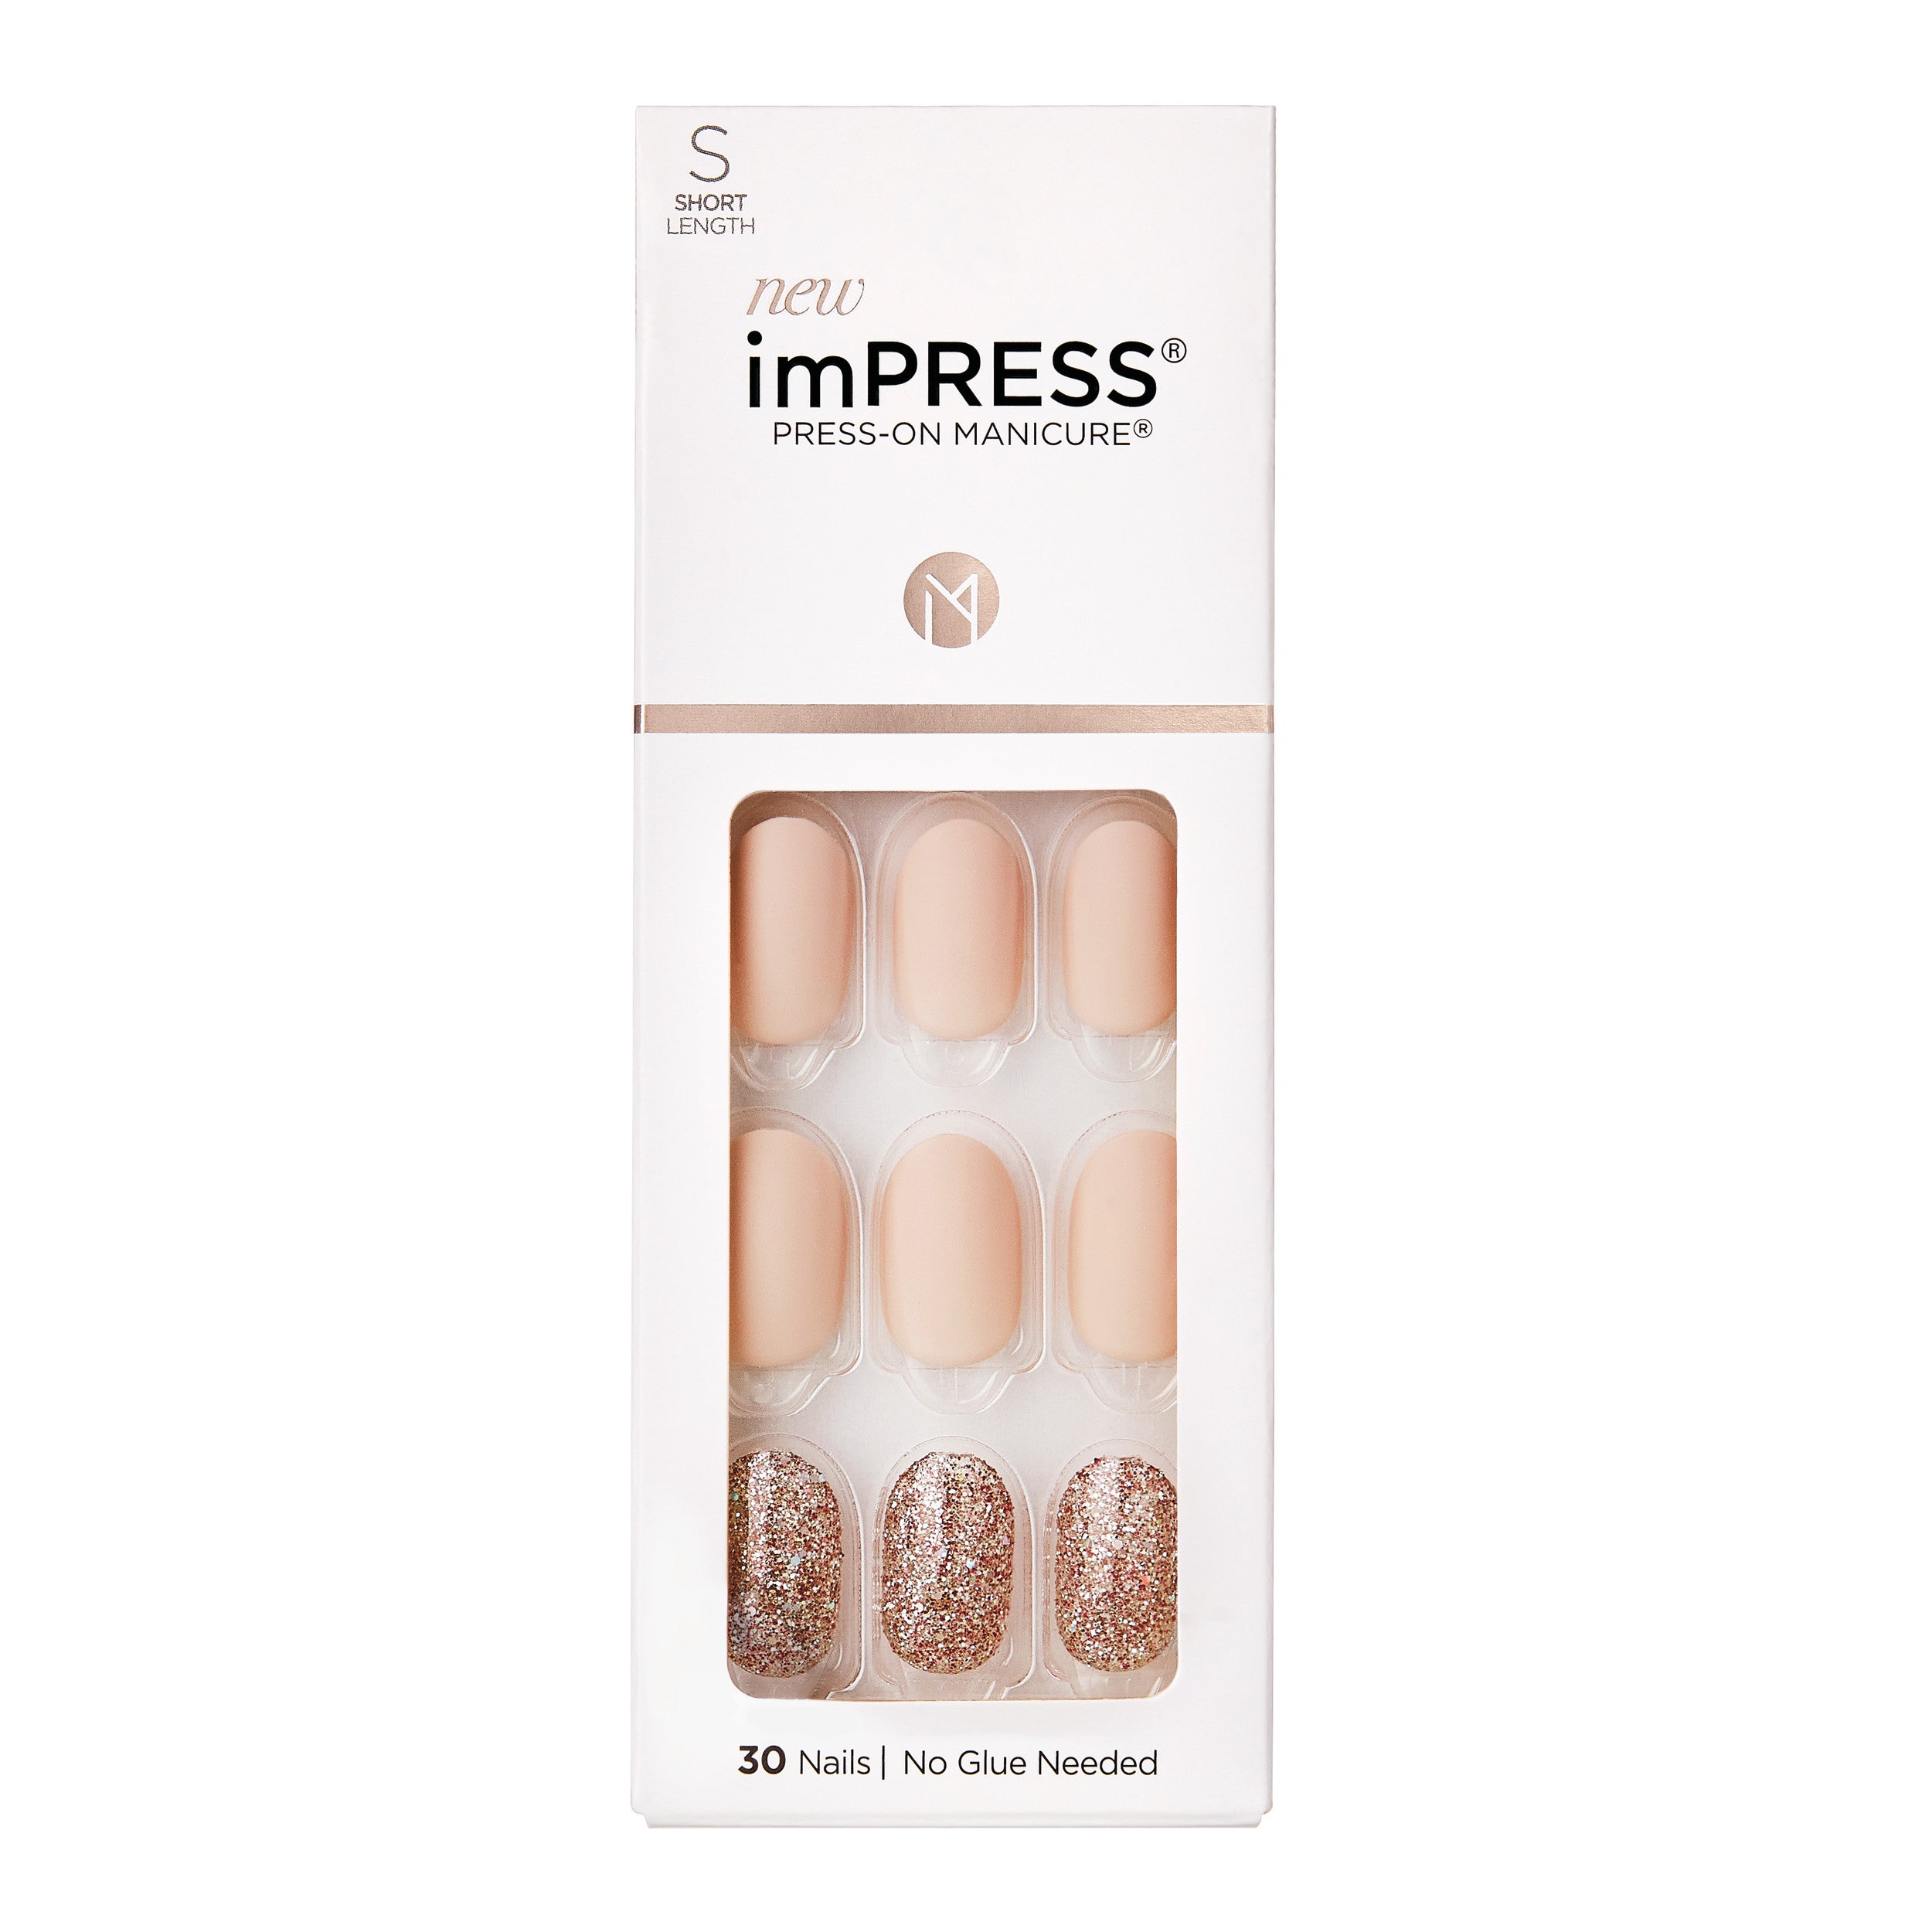 Press-on Manicure Artificial Nails Short Length - Evanesce